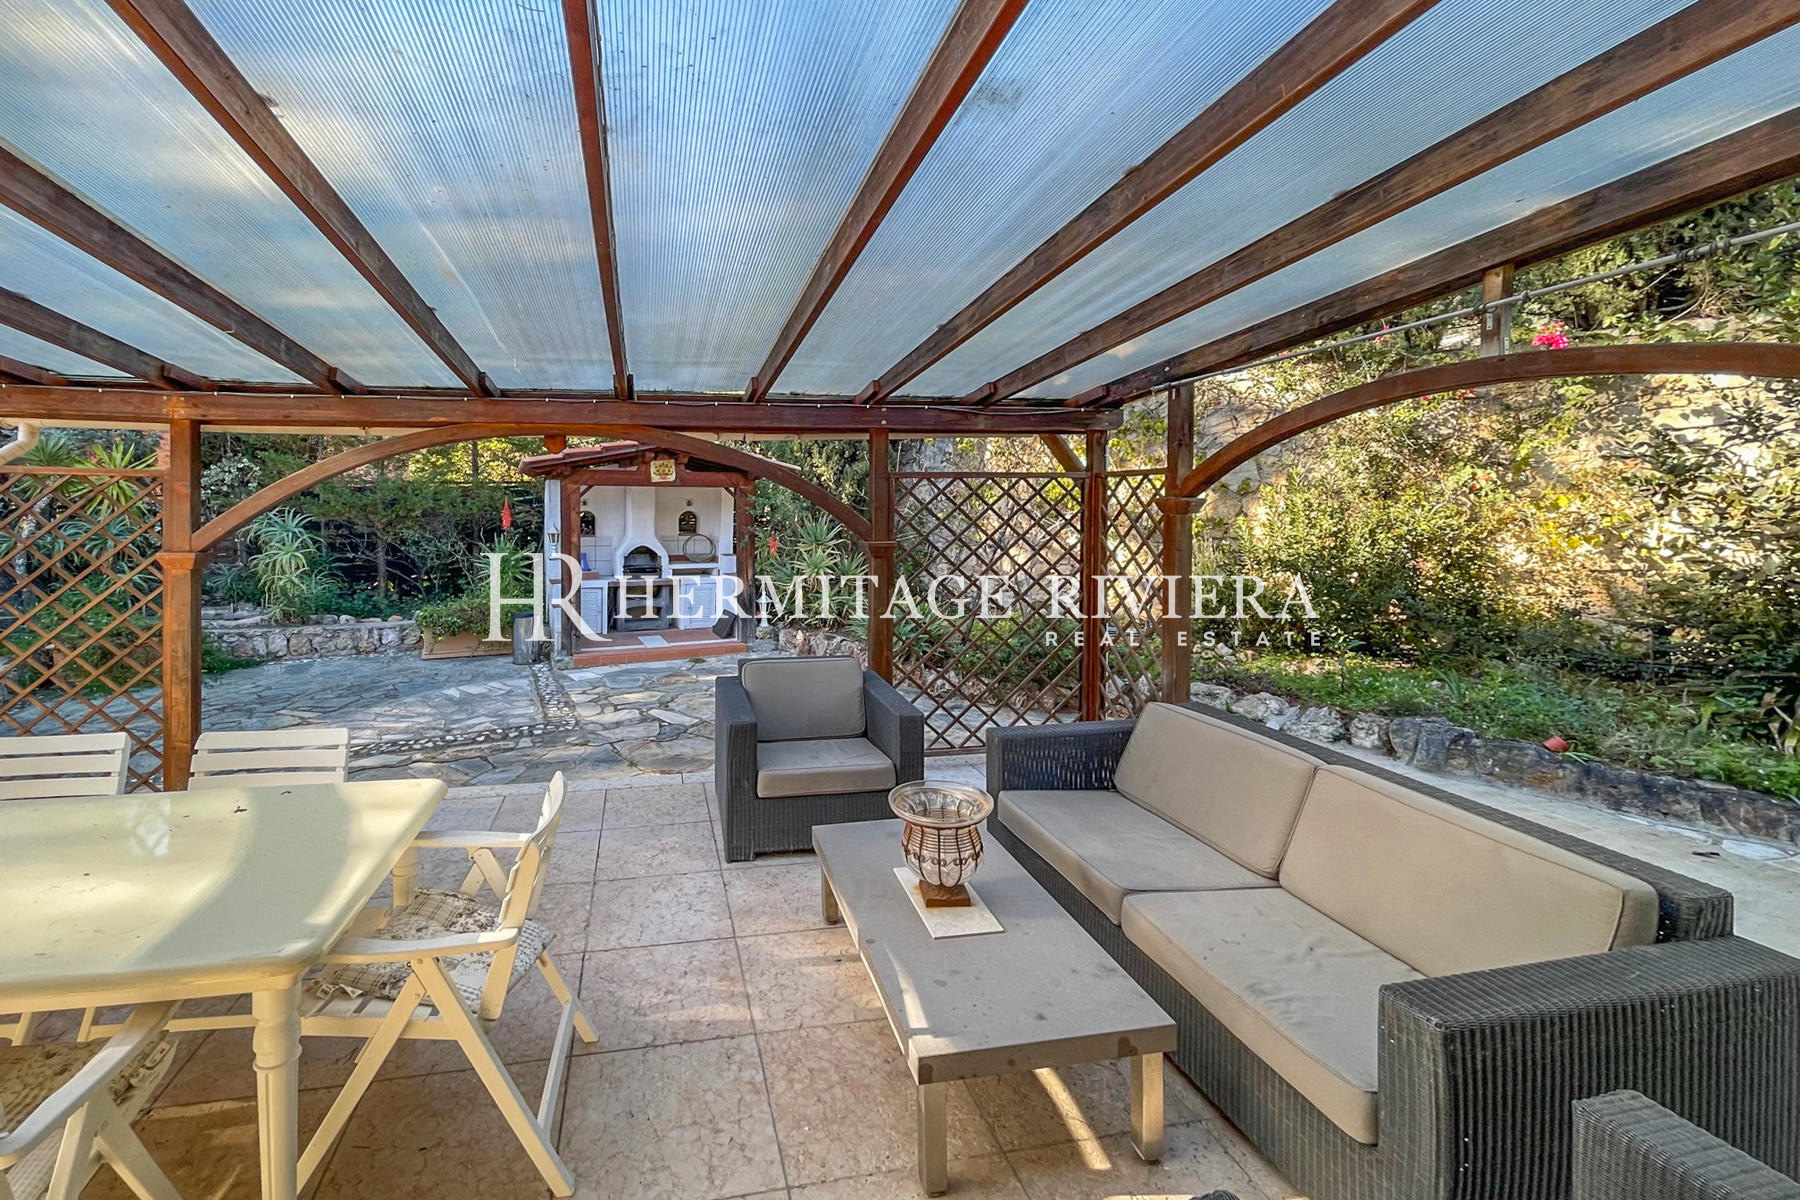 Property with views Monaco in sought after location (image 13)